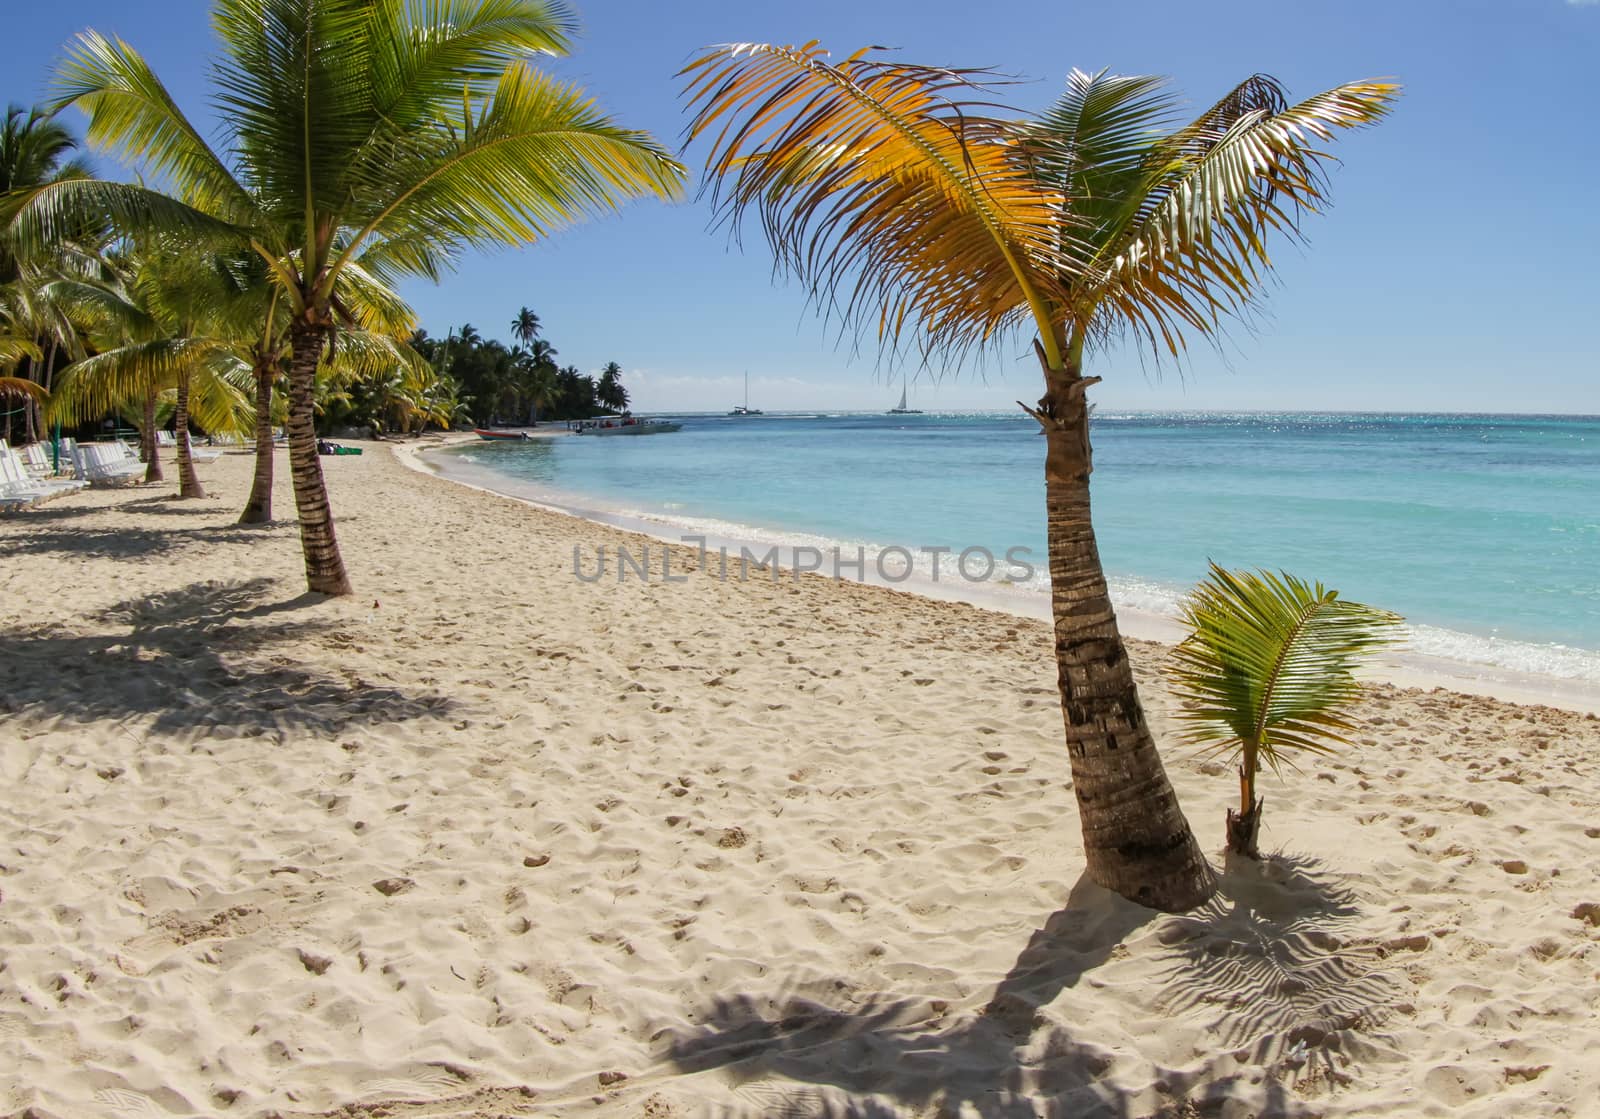 Palm trees, sand and the ocean are the relaxing views from the beaches of Saona Island.